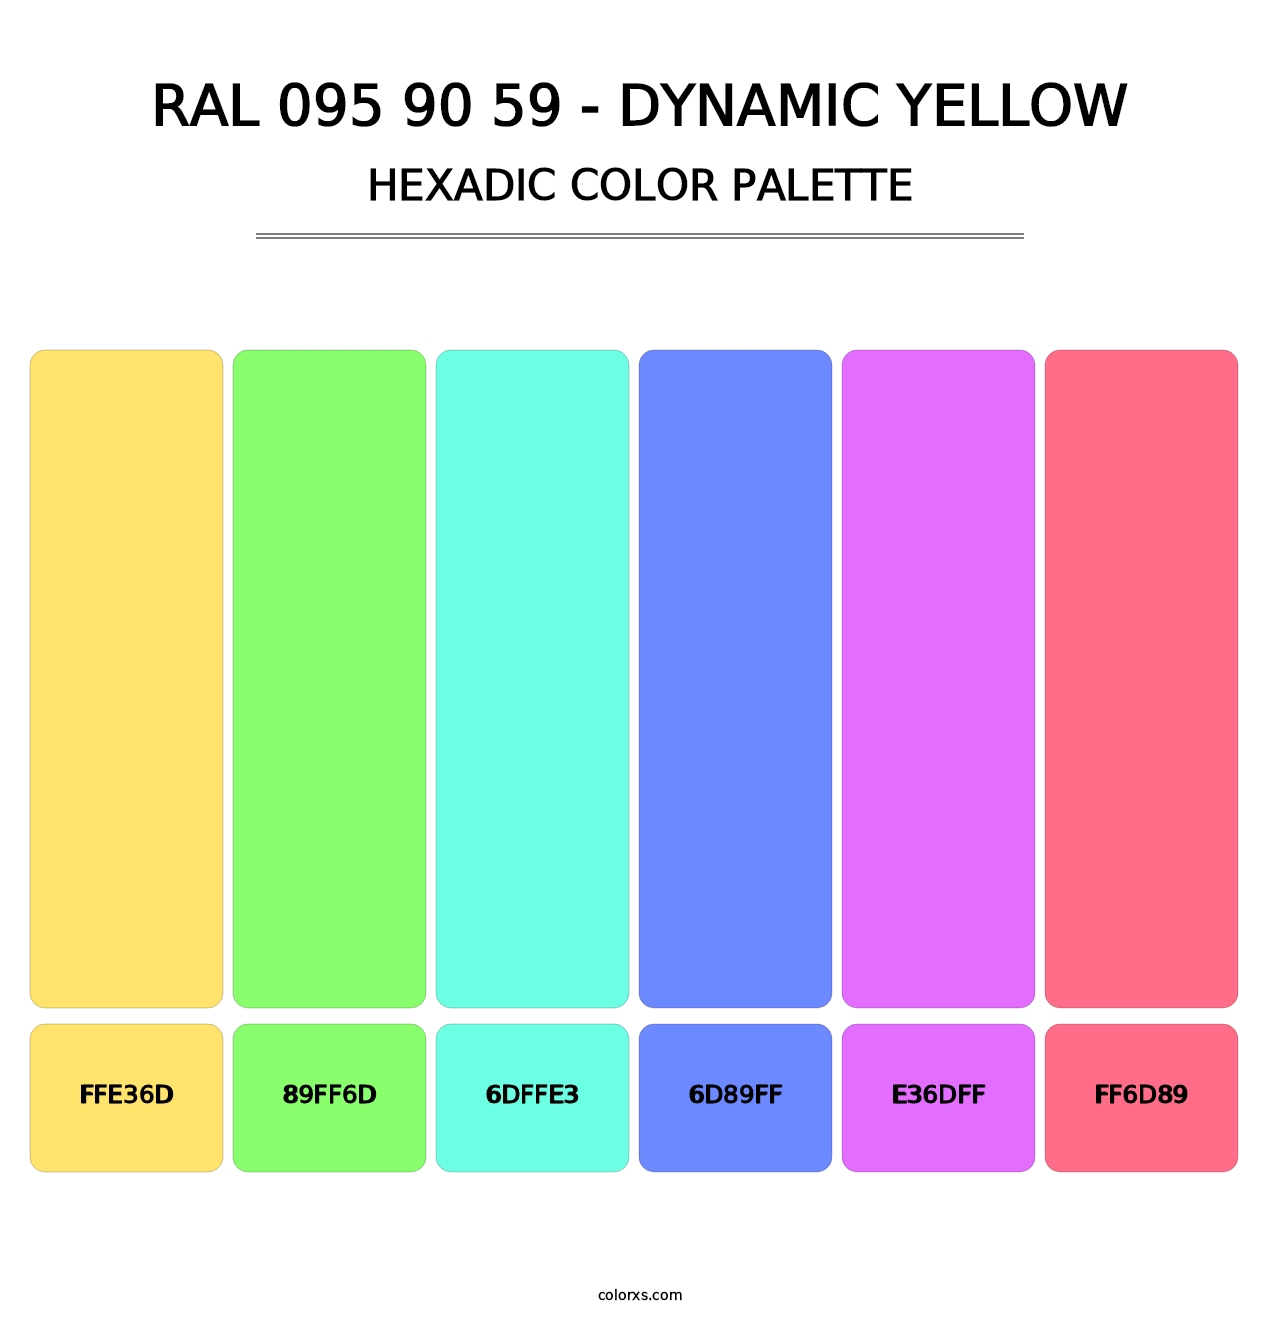 RAL 095 90 59 - Dynamic Yellow - Hexadic Color Palette